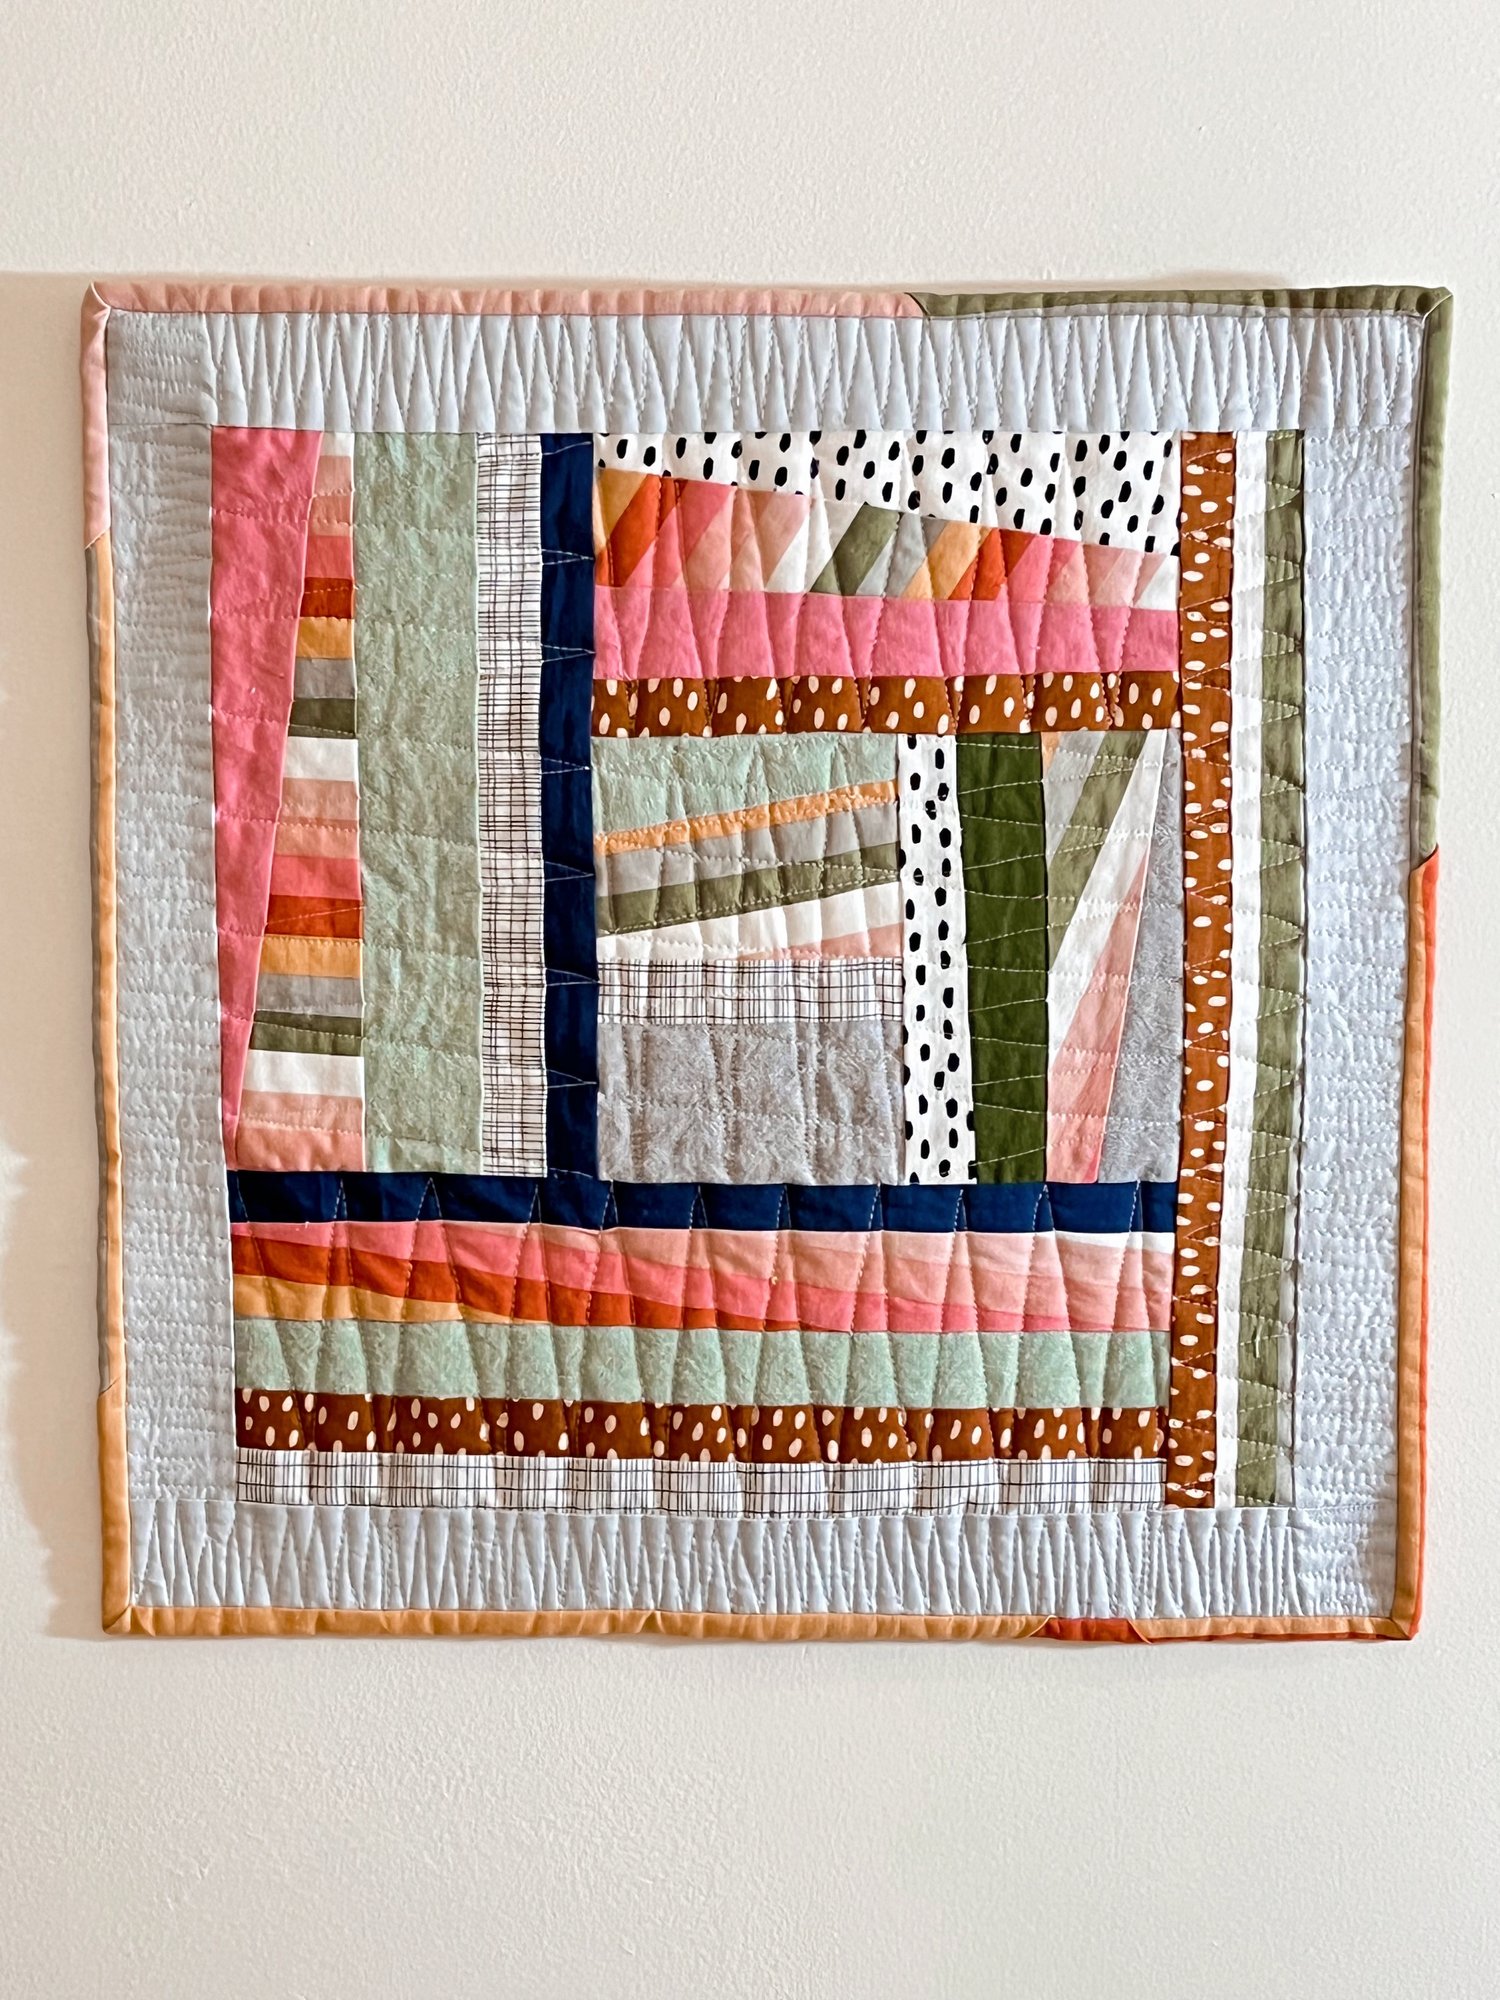 Art for Adults - Improvisational Quilting (4-part series) Tickets